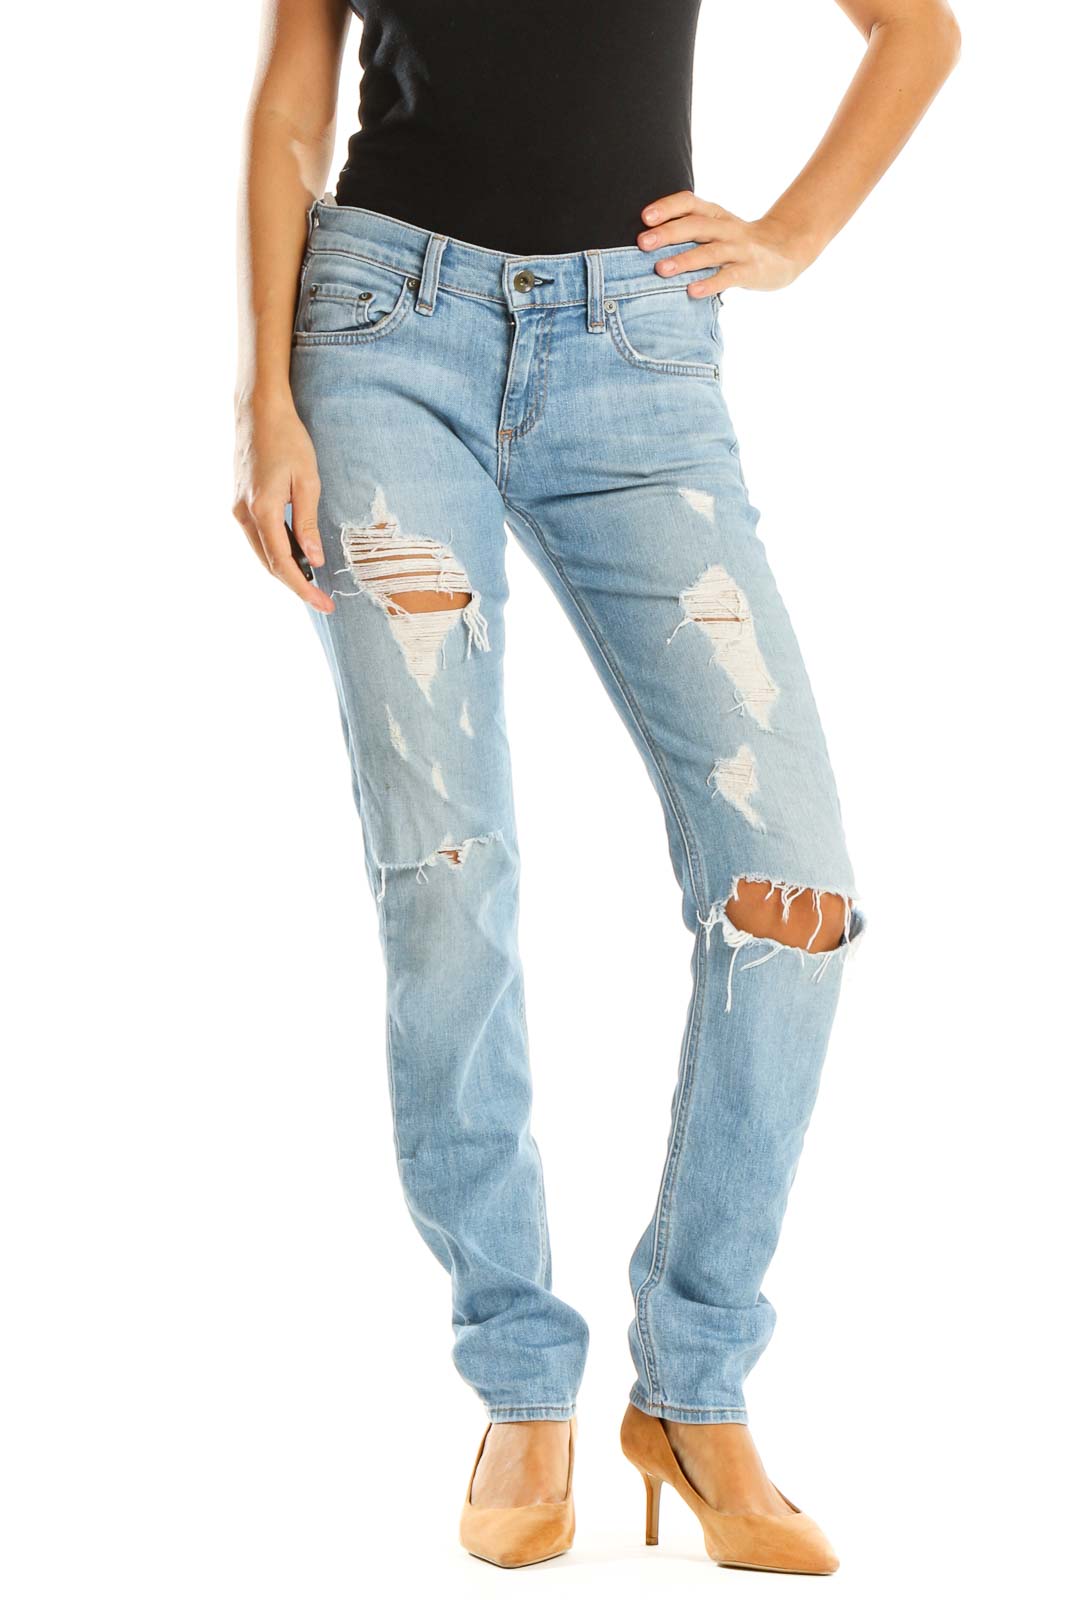 Blue Straight Leg Distressed Jeans Front